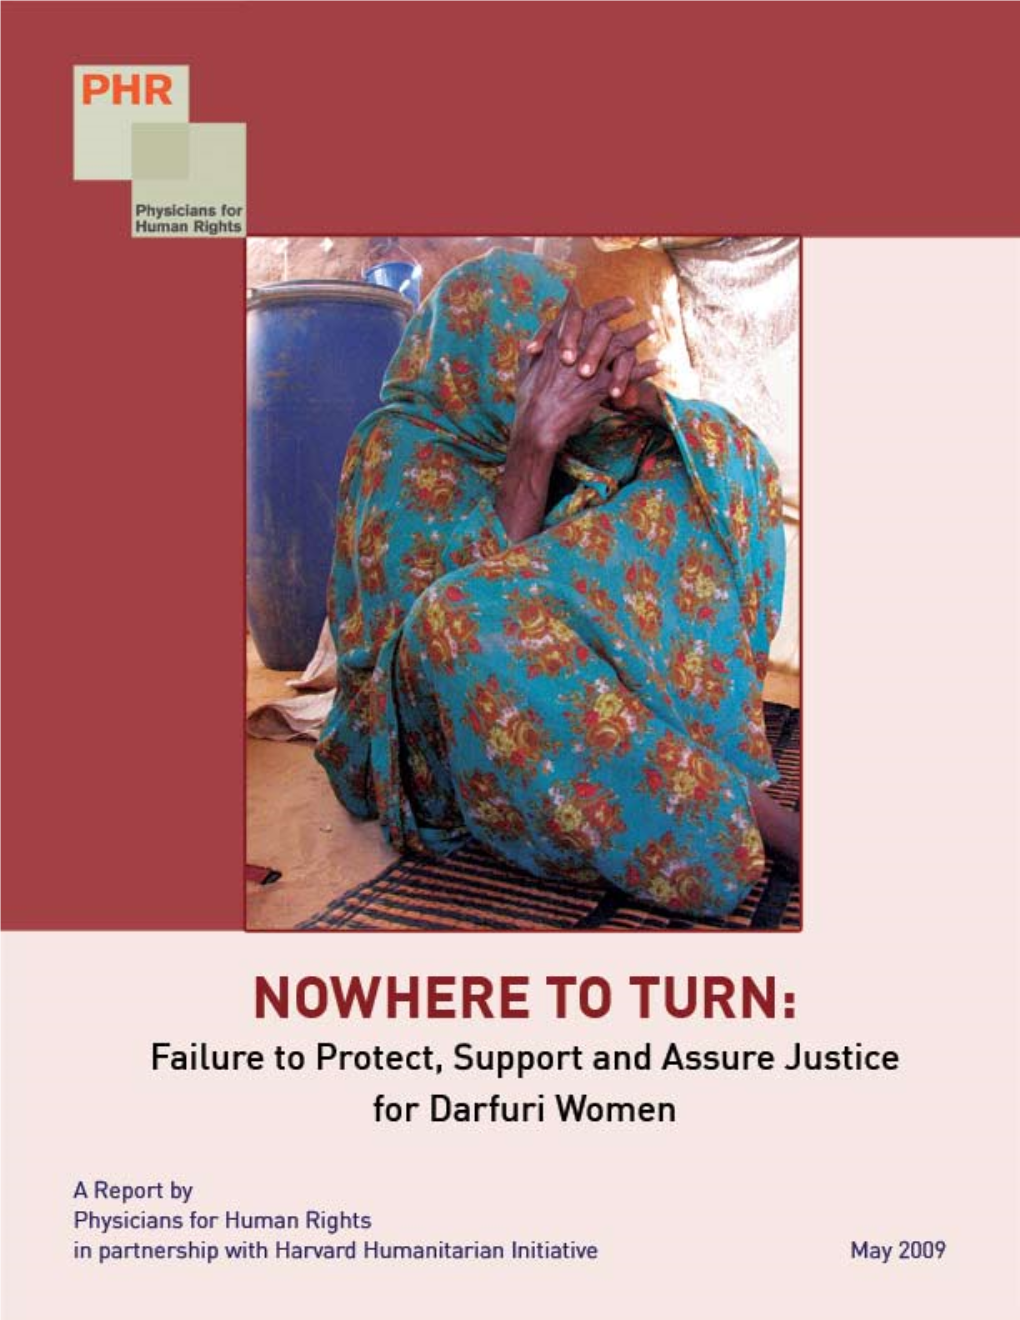 Nowhere to Turn: Failure to Protect, Support and Assure Justice for Darfuri Women